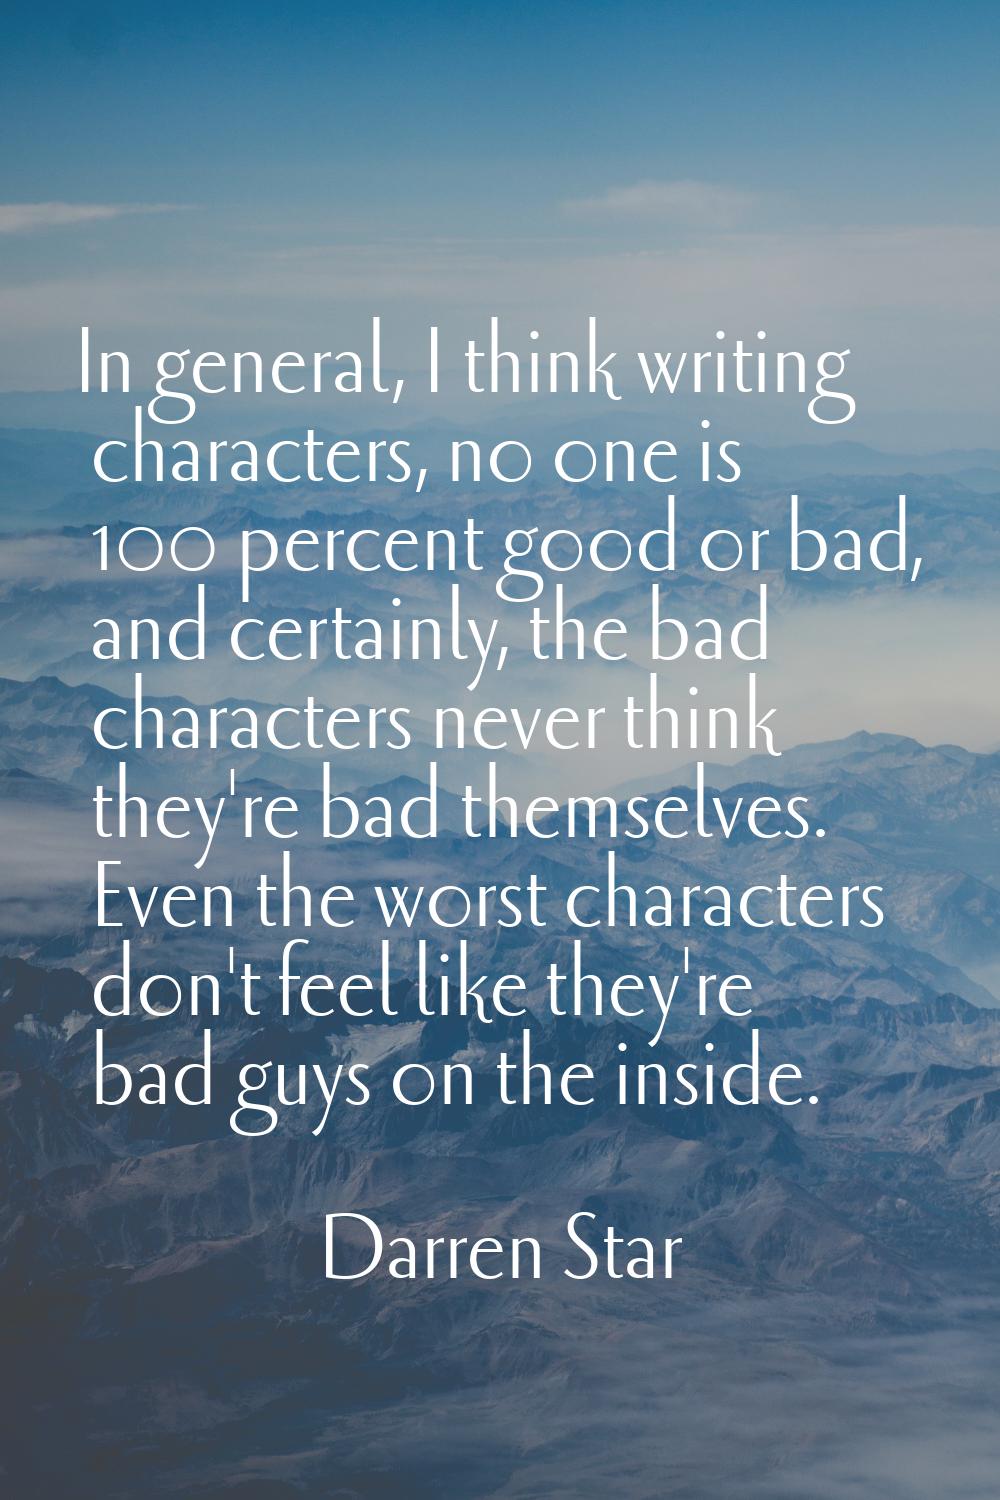 In general, I think writing characters, no one is 100 percent good or bad, and certainly, the bad c